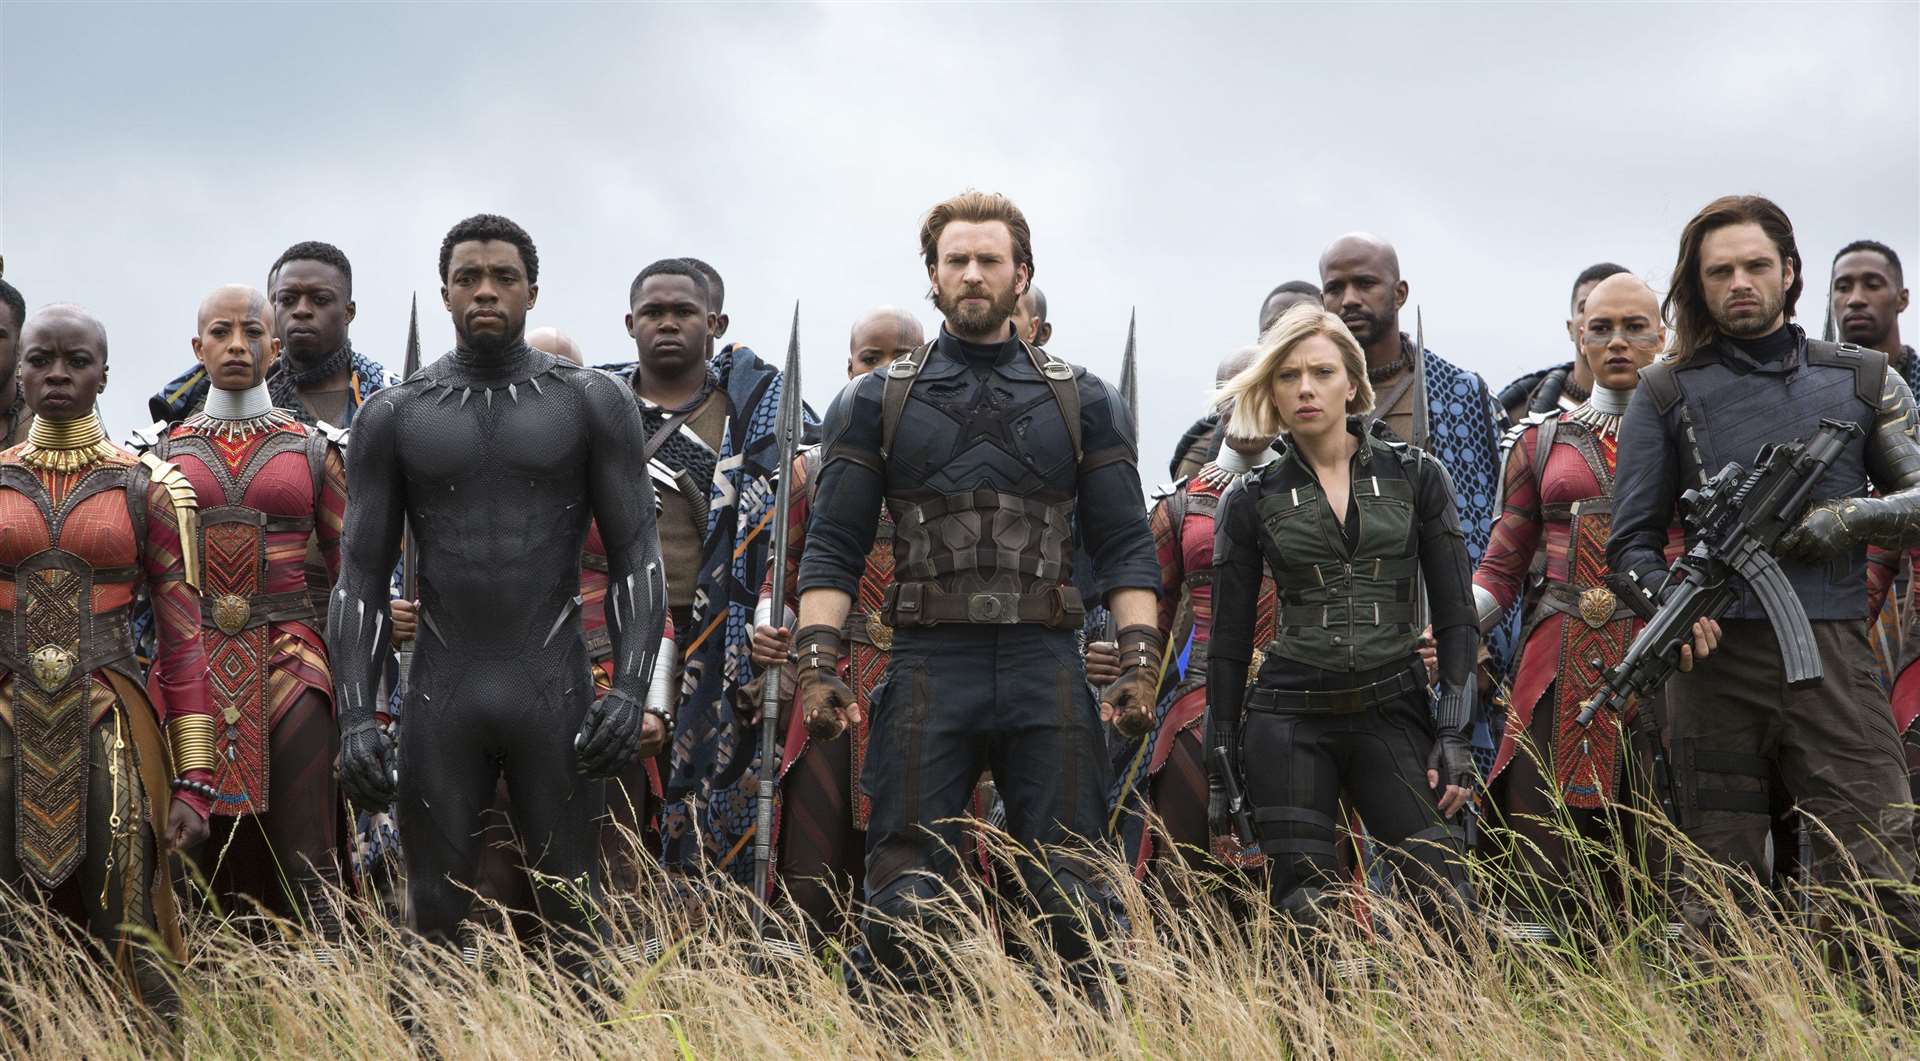 Avengers: Endgame is coming next after Avengers: Infinity War Picture: PA Photo/Marvel Studios/Chuck Zlotnick